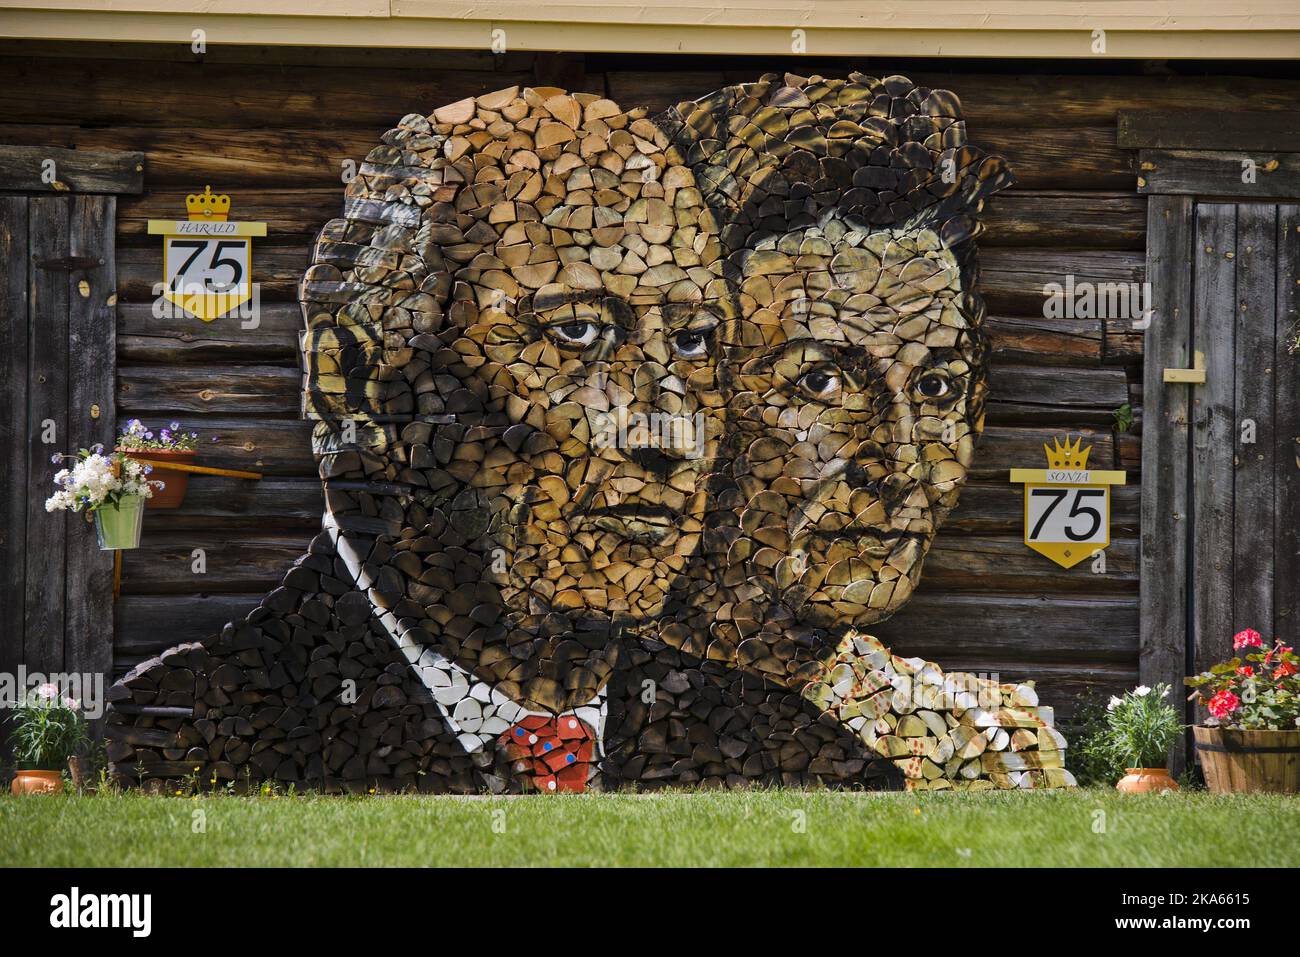 This winter Ole Kristian Kjelling (80) and his wife Zofia will be kept warm by King Harald and Queen Sonja of Norway. A month ago he started the task of stacking firewood into a portrait of the royal couple. It took 6-7 wheelbarrow loads, or 200-300 kilos of birch wood to complete the project. - I have painted everything with ordinary oil paints and been working under a tarpaulin for the last month. It is sculpted and then painted. ItÕs a good thing I have the patience of a horse - the weather has not been on my side Stock Photo